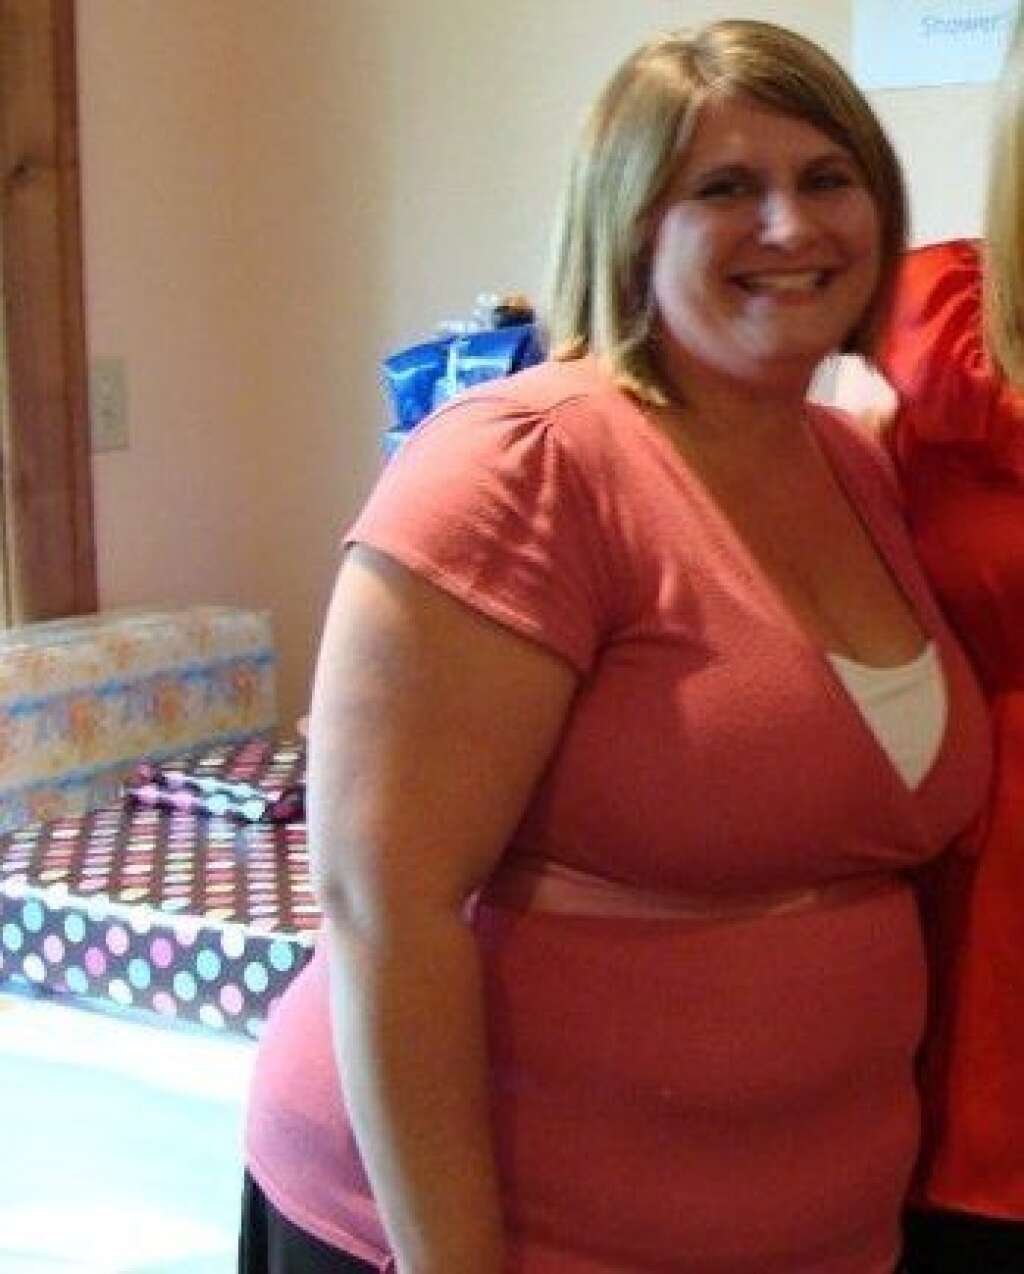 Jessica BEFORE - <a href="http://www.huffingtonpost.com/2013/02/06/i-lost-weight-jessica-pancheri_n_2583074.html">Read Jessica's story here.</a>